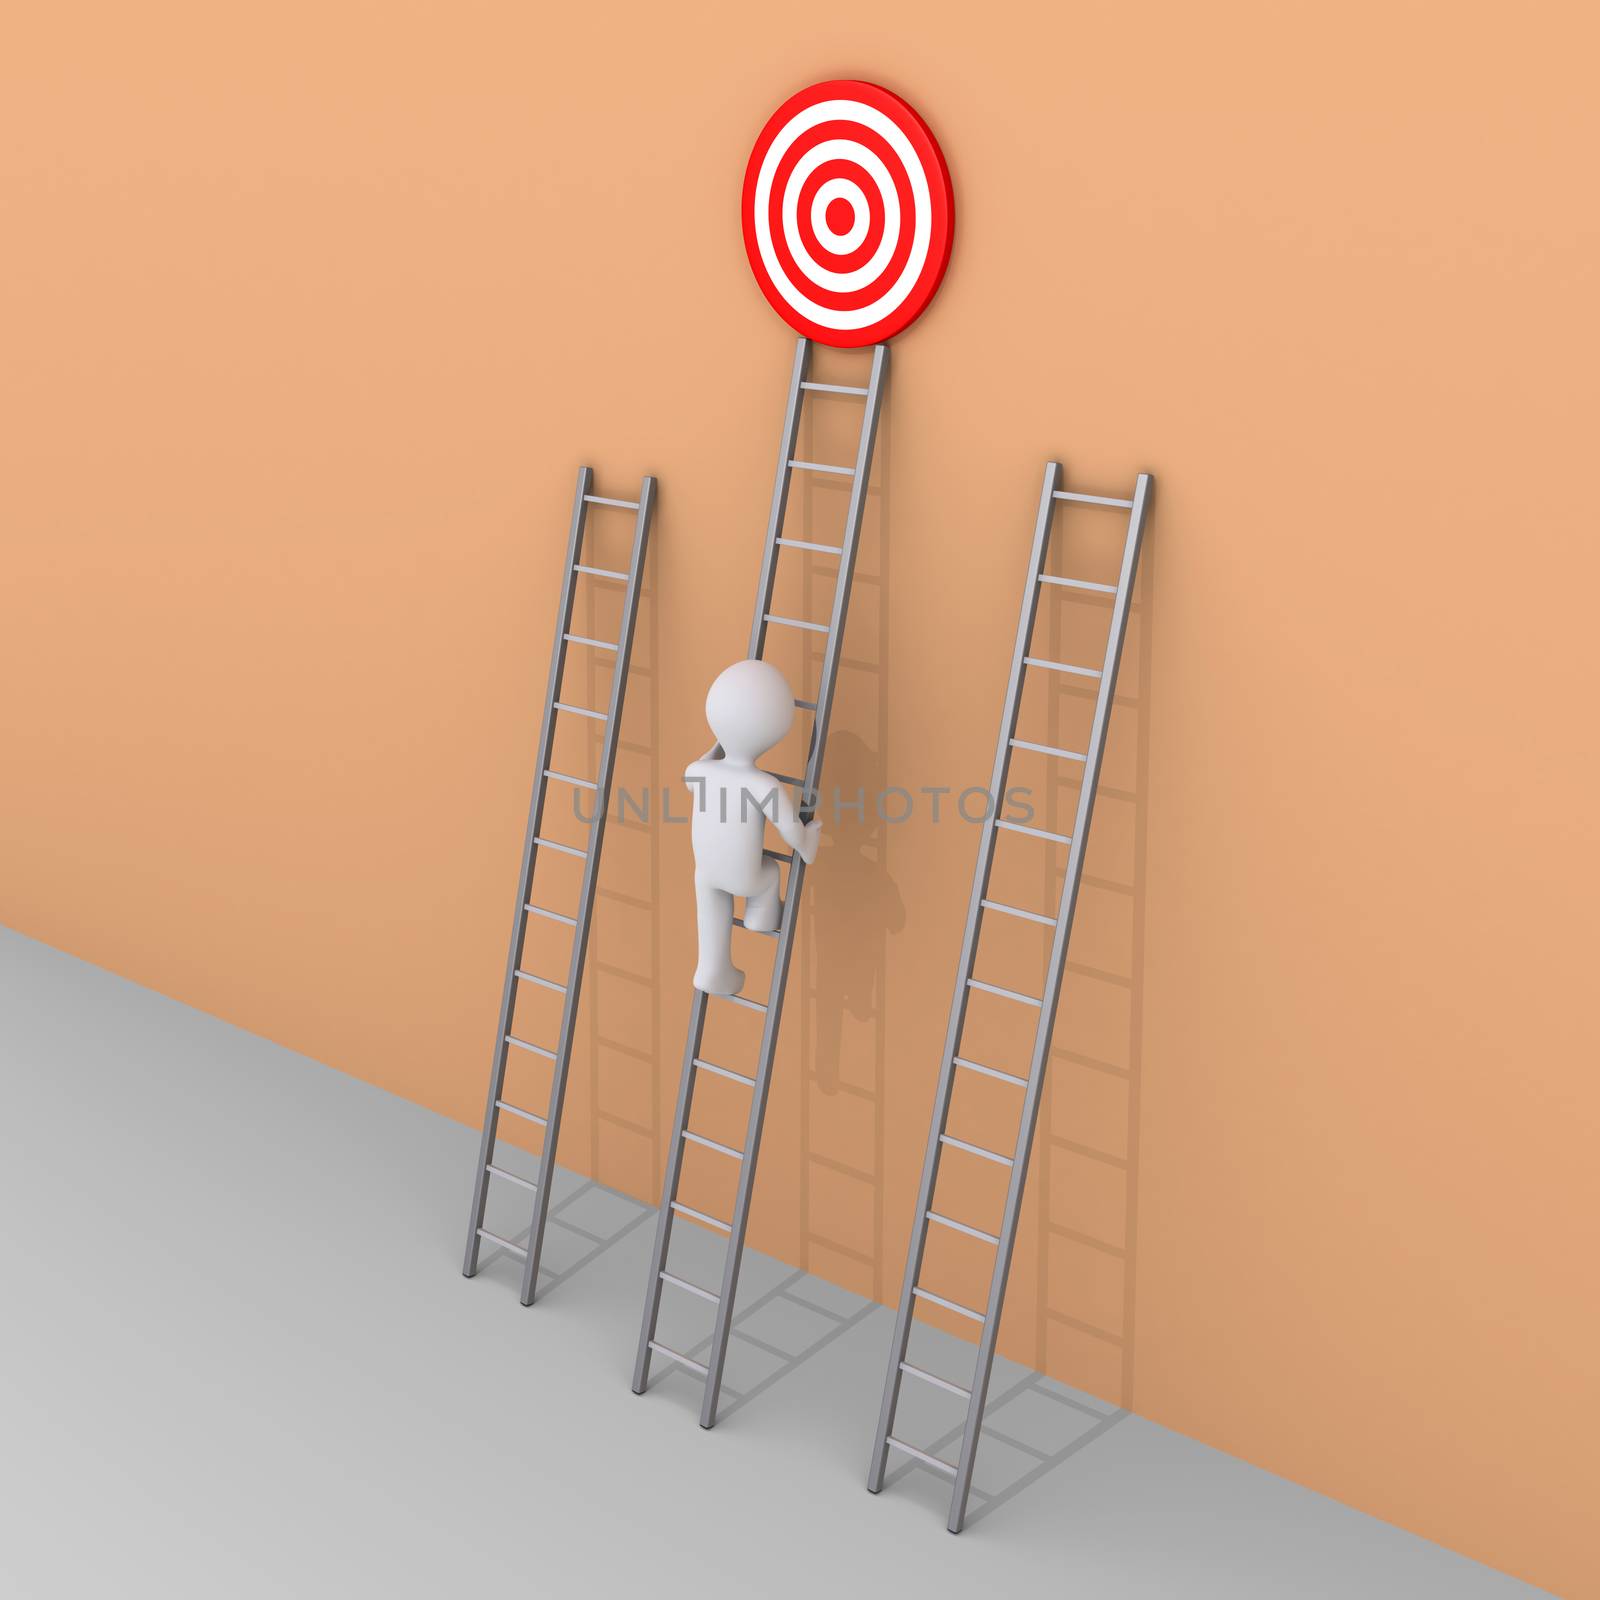 3d person is climbing the ladder that leads to the target